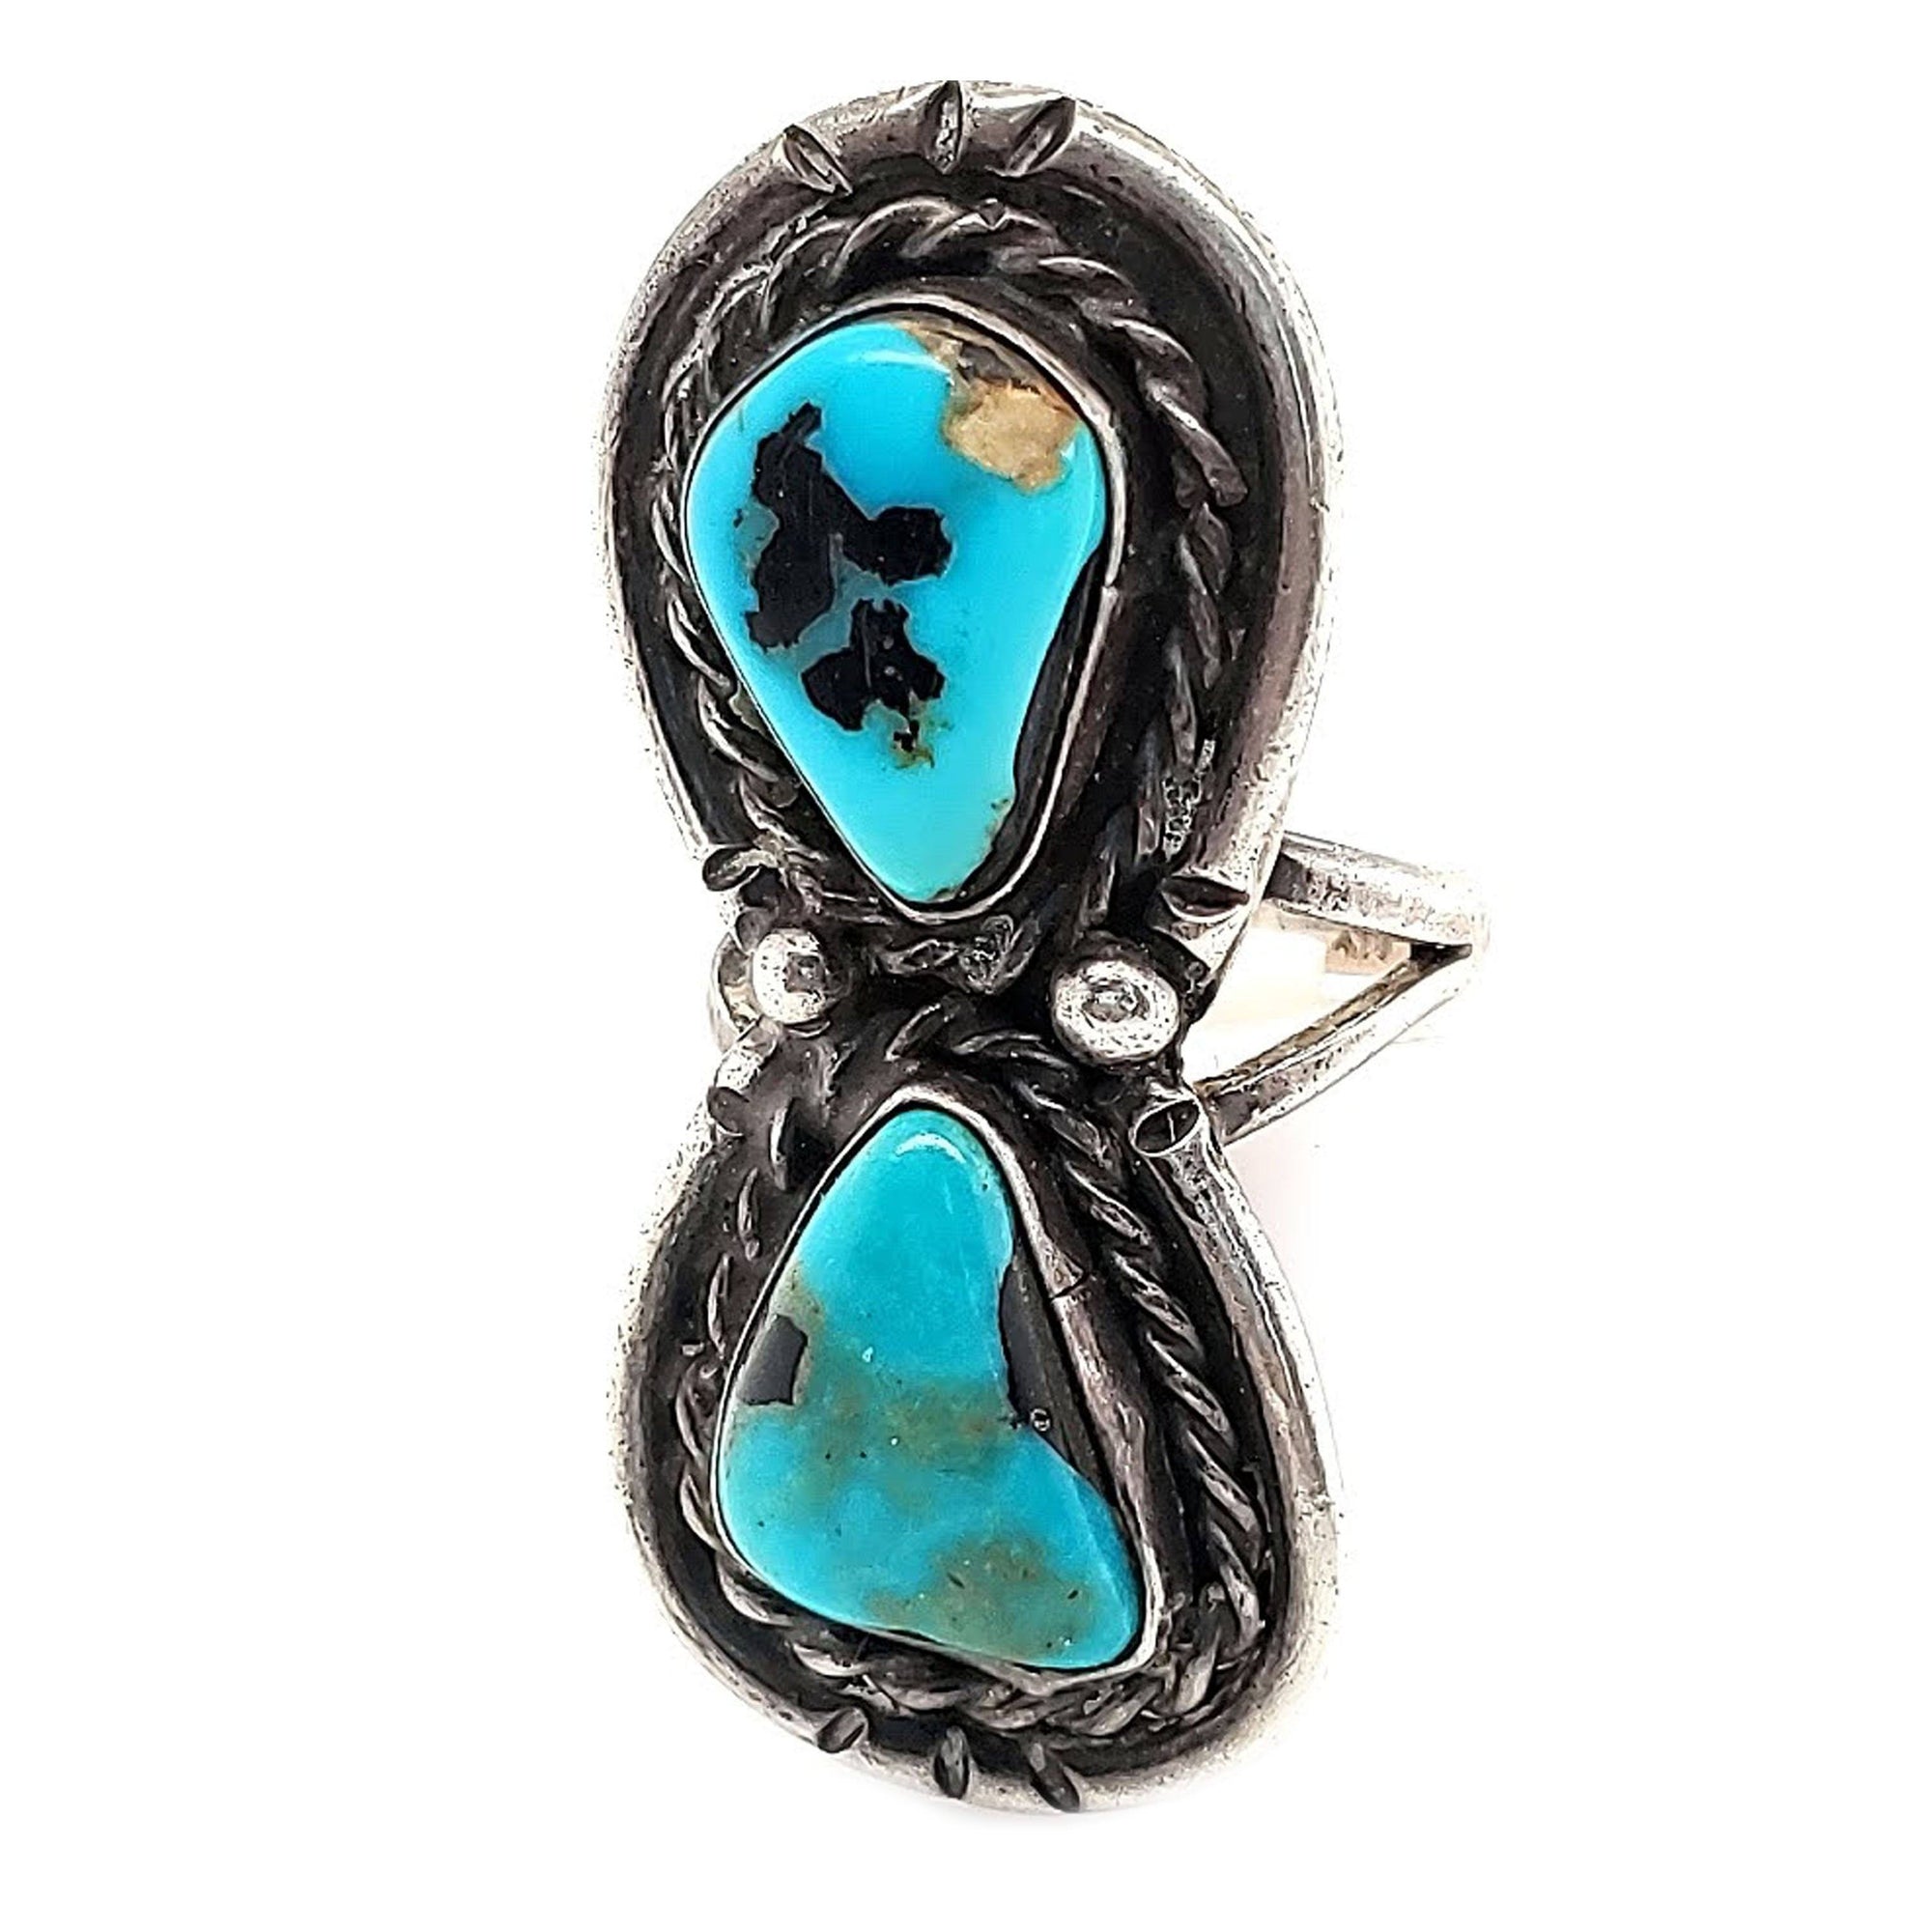 (R) Turquoise Hourglass Ring, size 5-1/2 - R24